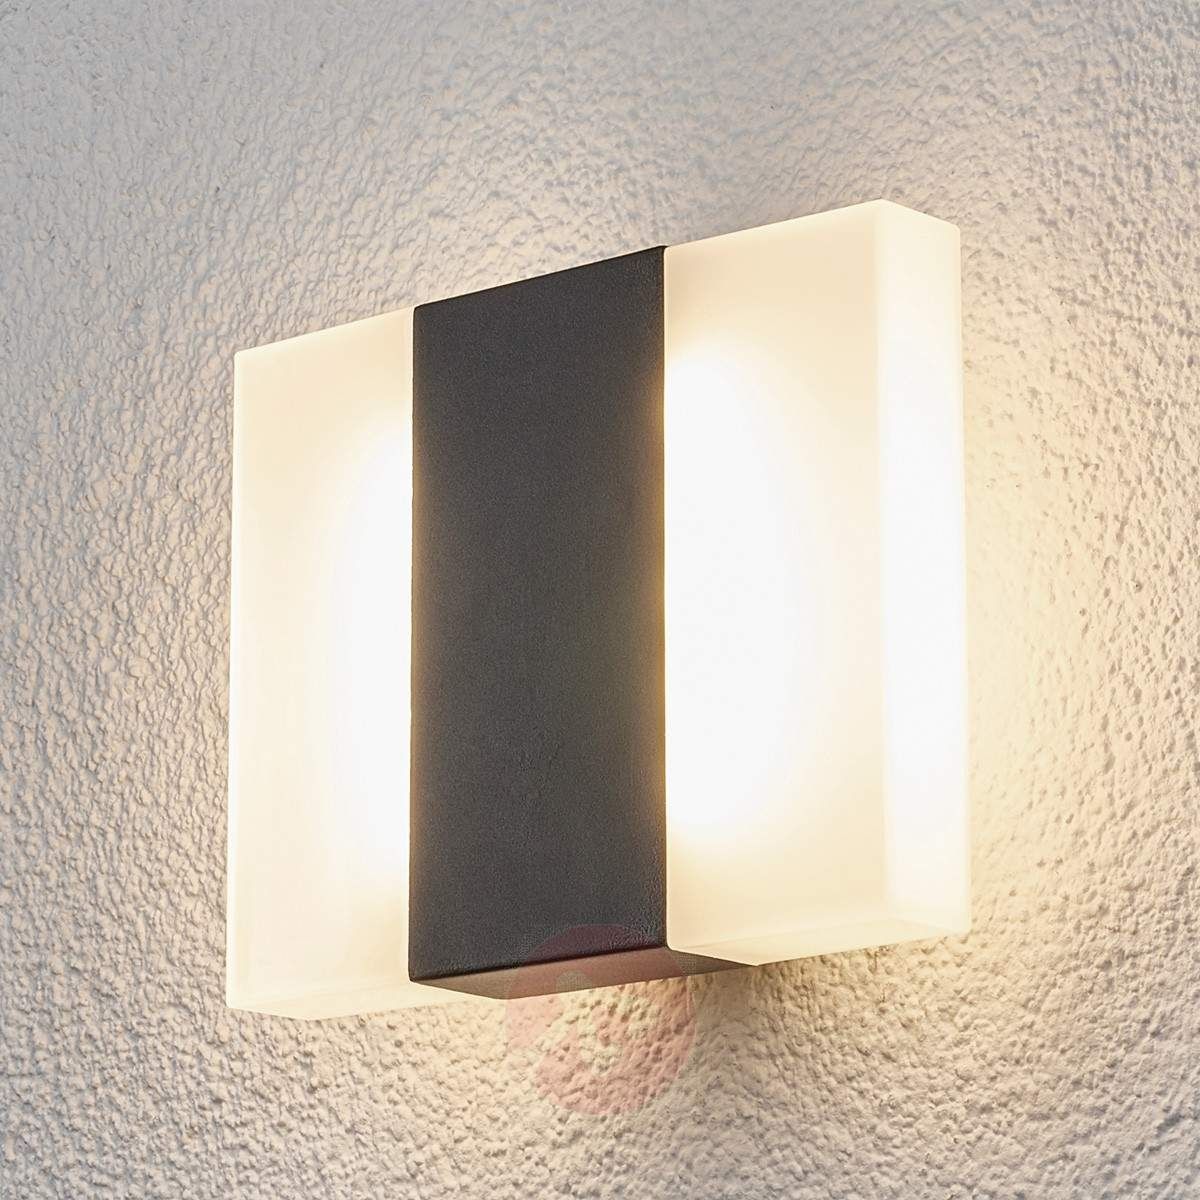 Börje – Led Outdoor Wall Light In A Square Shape | Lights (View 11 of 15)